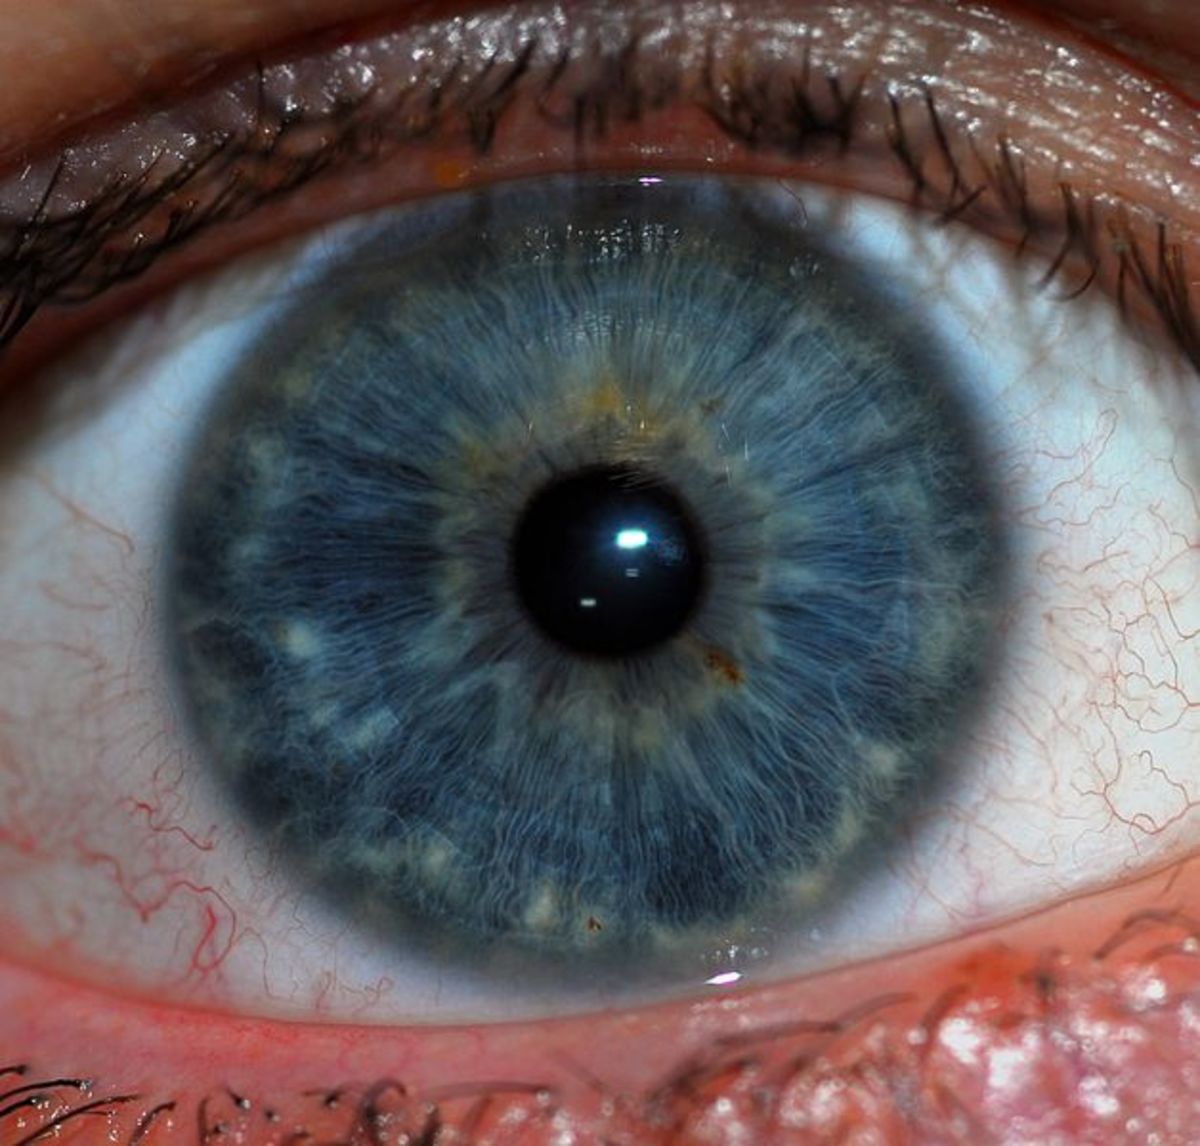 The normal undilated pupil